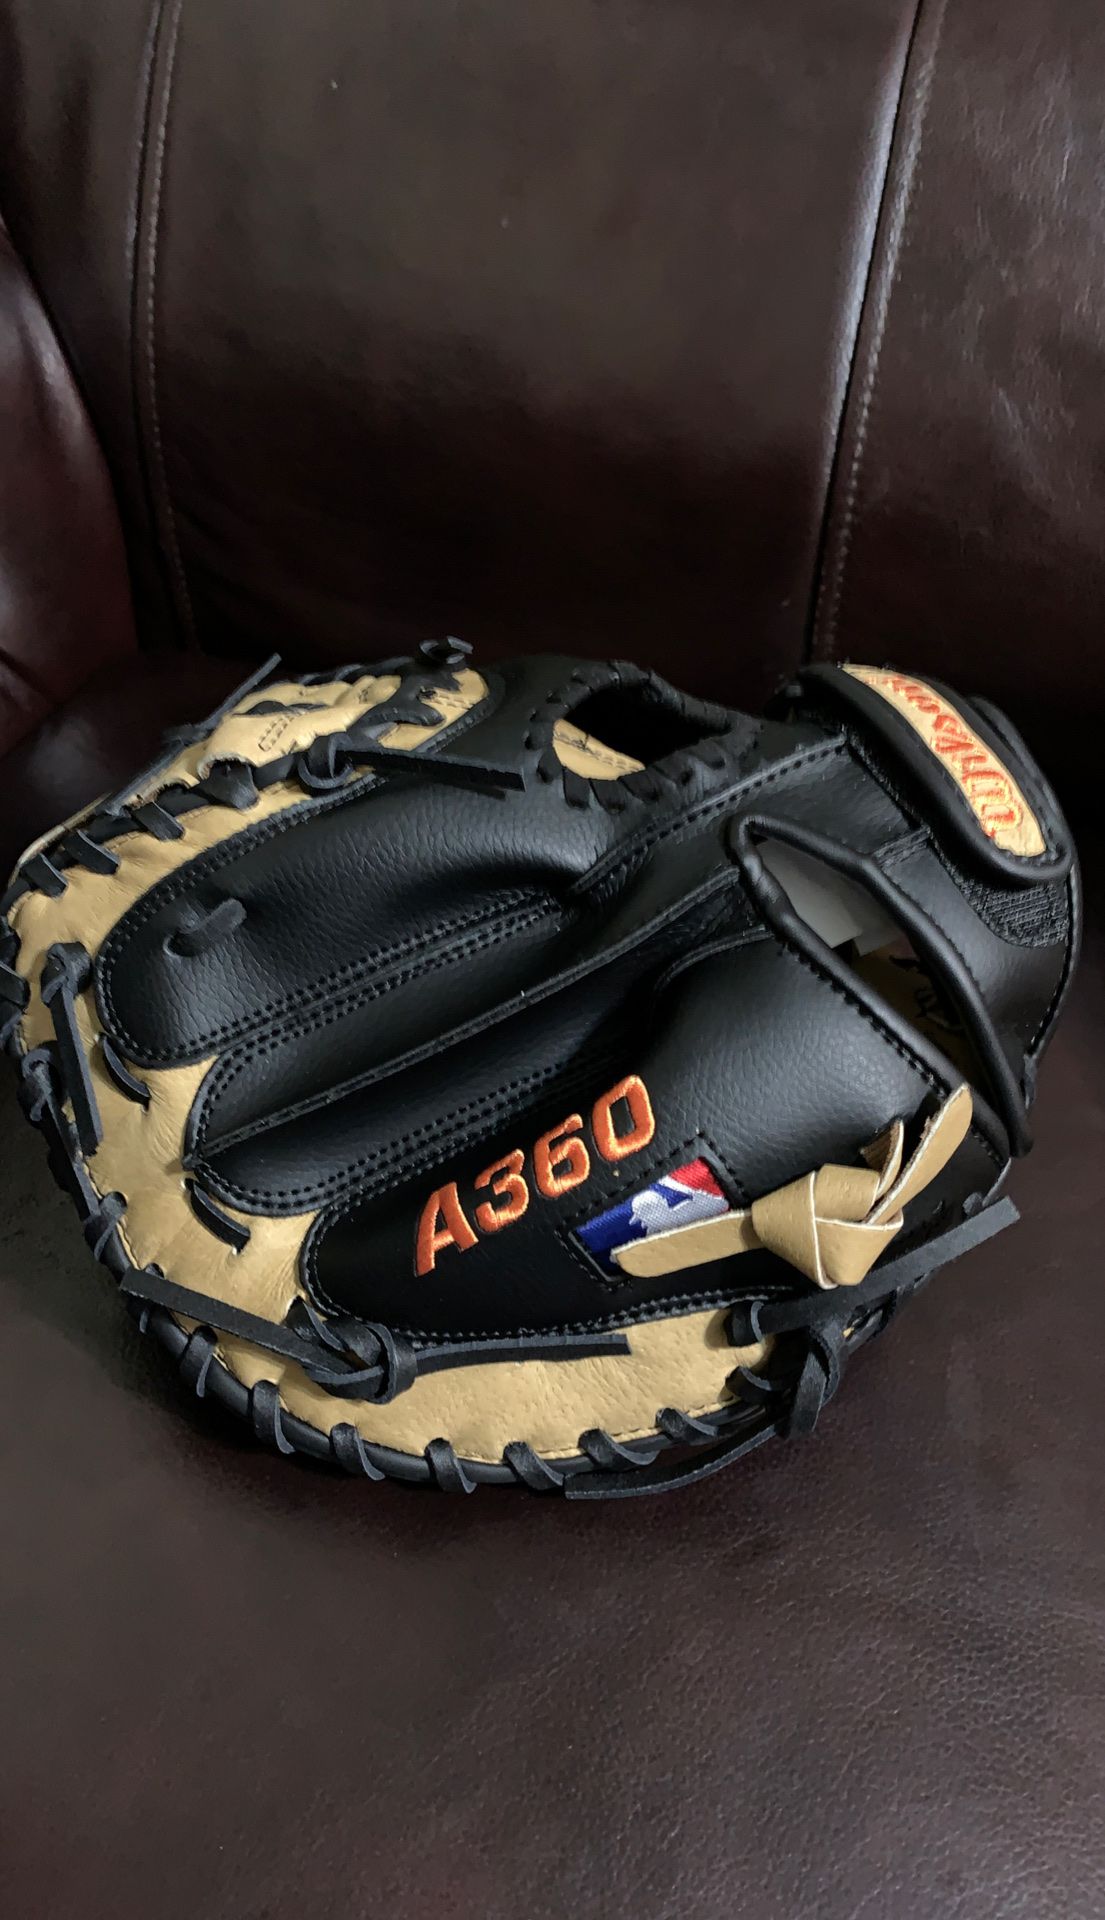 Catcher and right handed baseball gloves